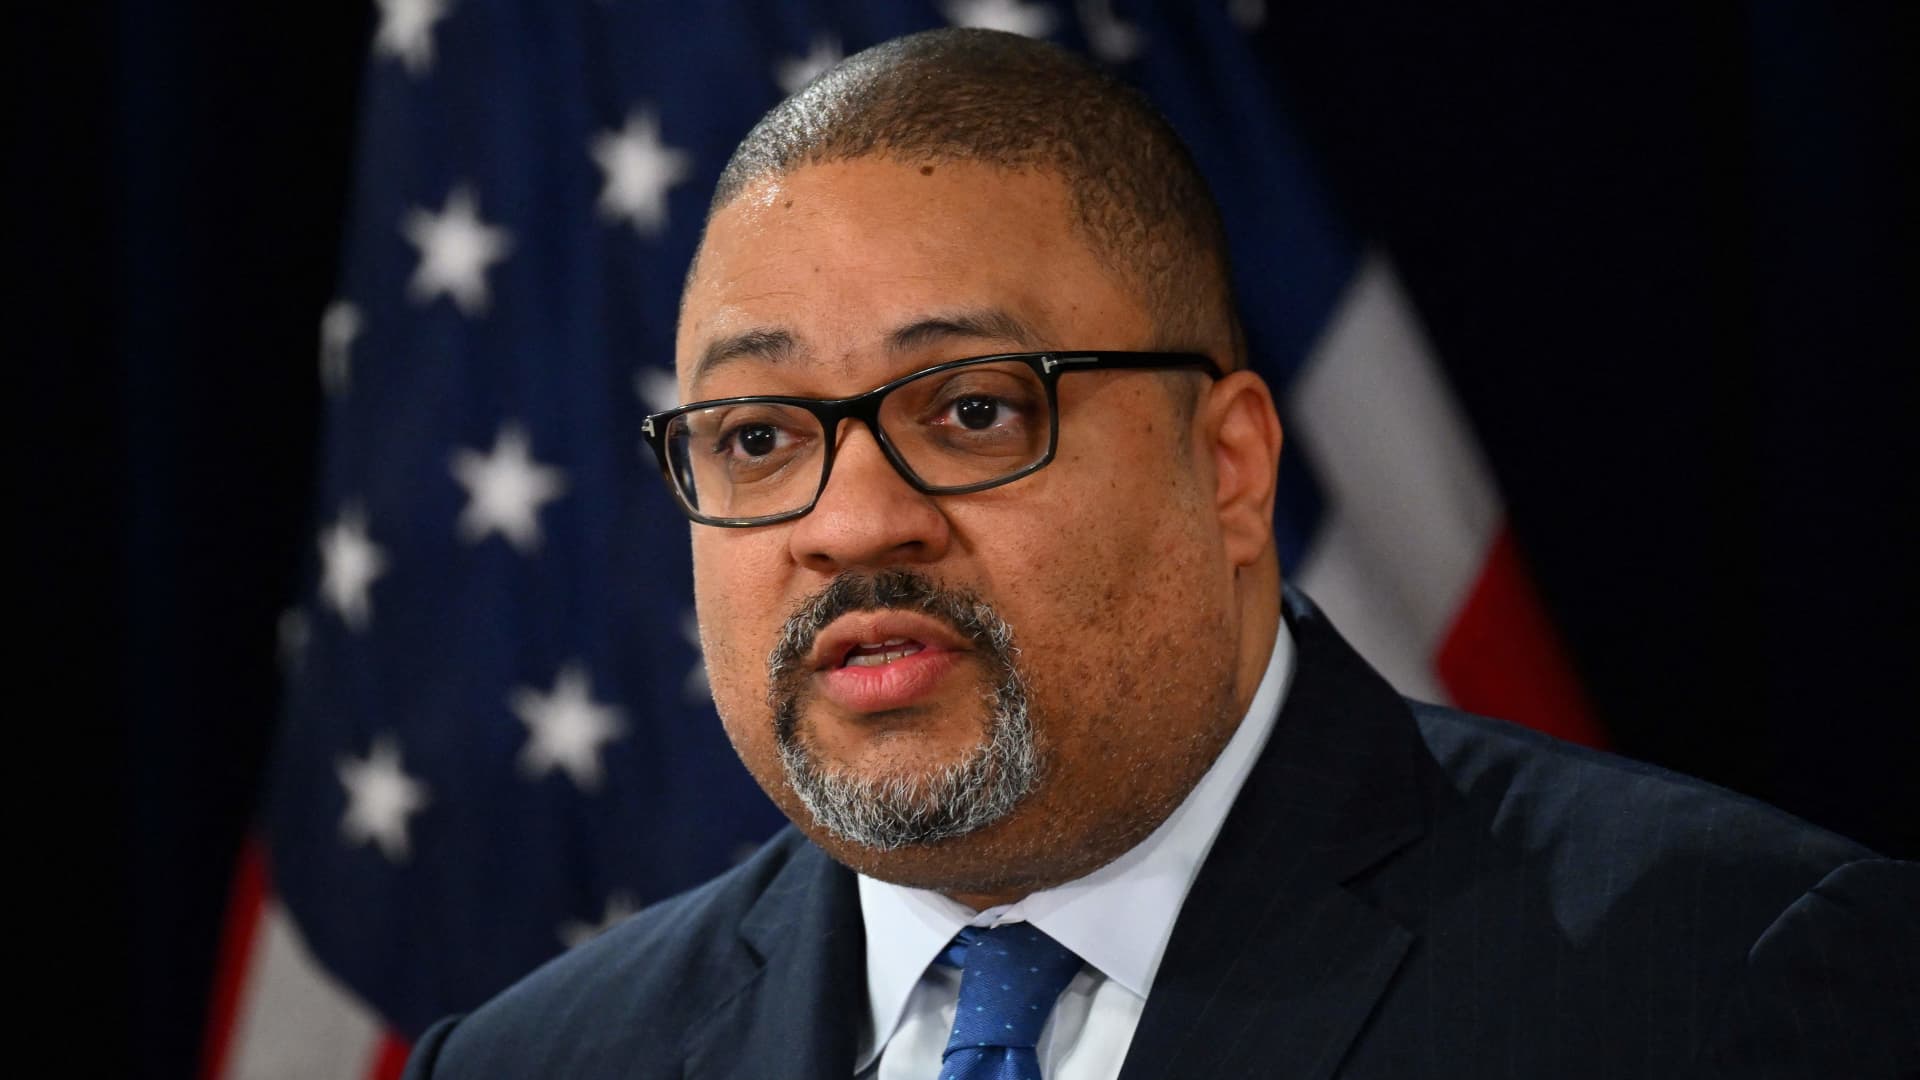 Manhattan District Attorney Alvin Bragg speaks during a press conference to discuss his indictment of former President Donald Trump, outside the Manhattan Federal Court in New York on April 4, 2023.